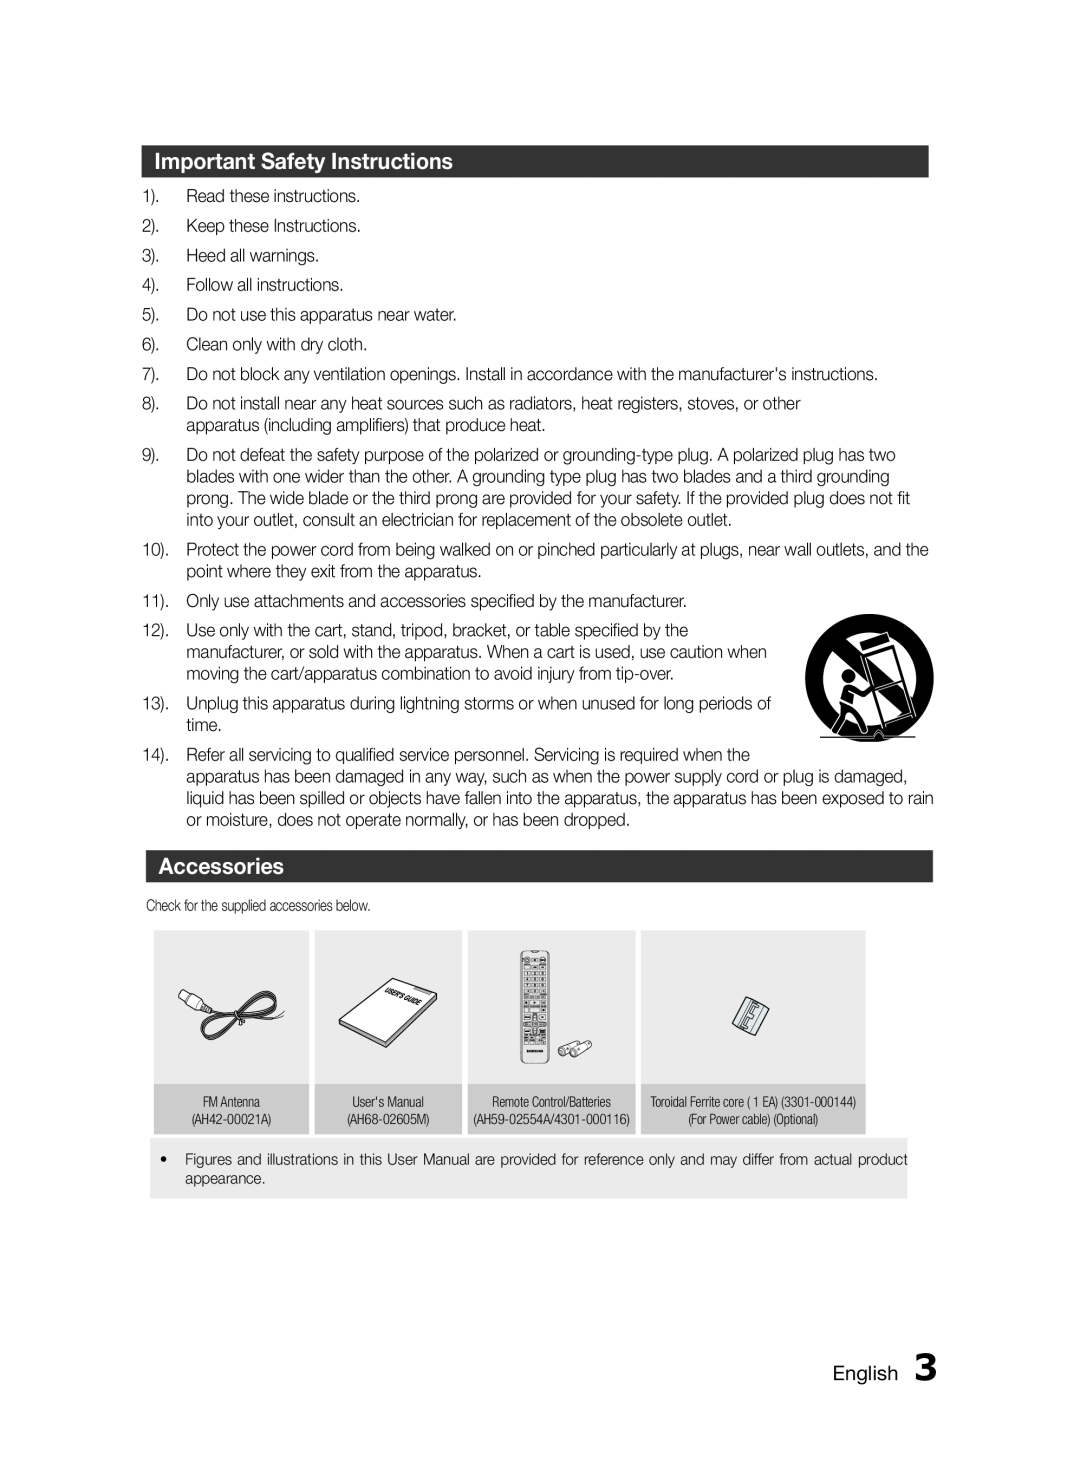 Samsung MXF830BZA user manual Important Safety Instructions, Accessories, English 